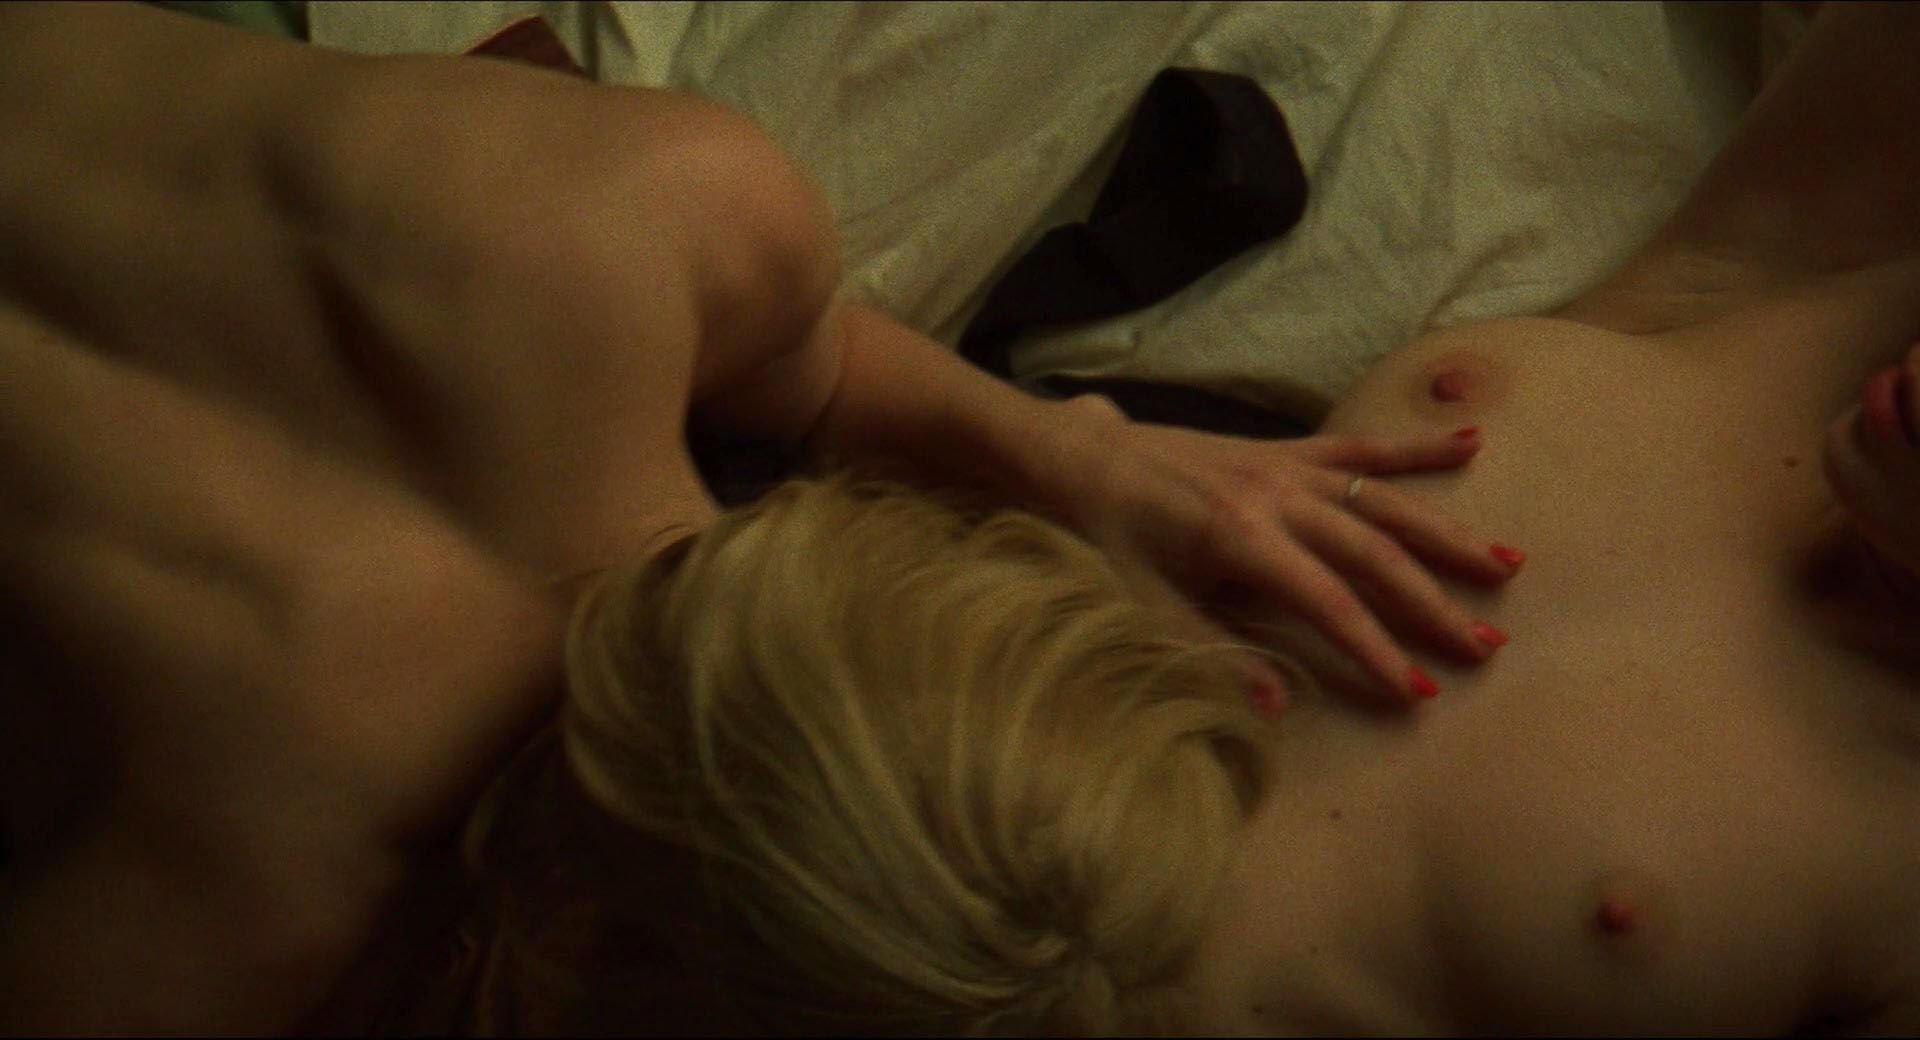 Cate blanchett the fappening